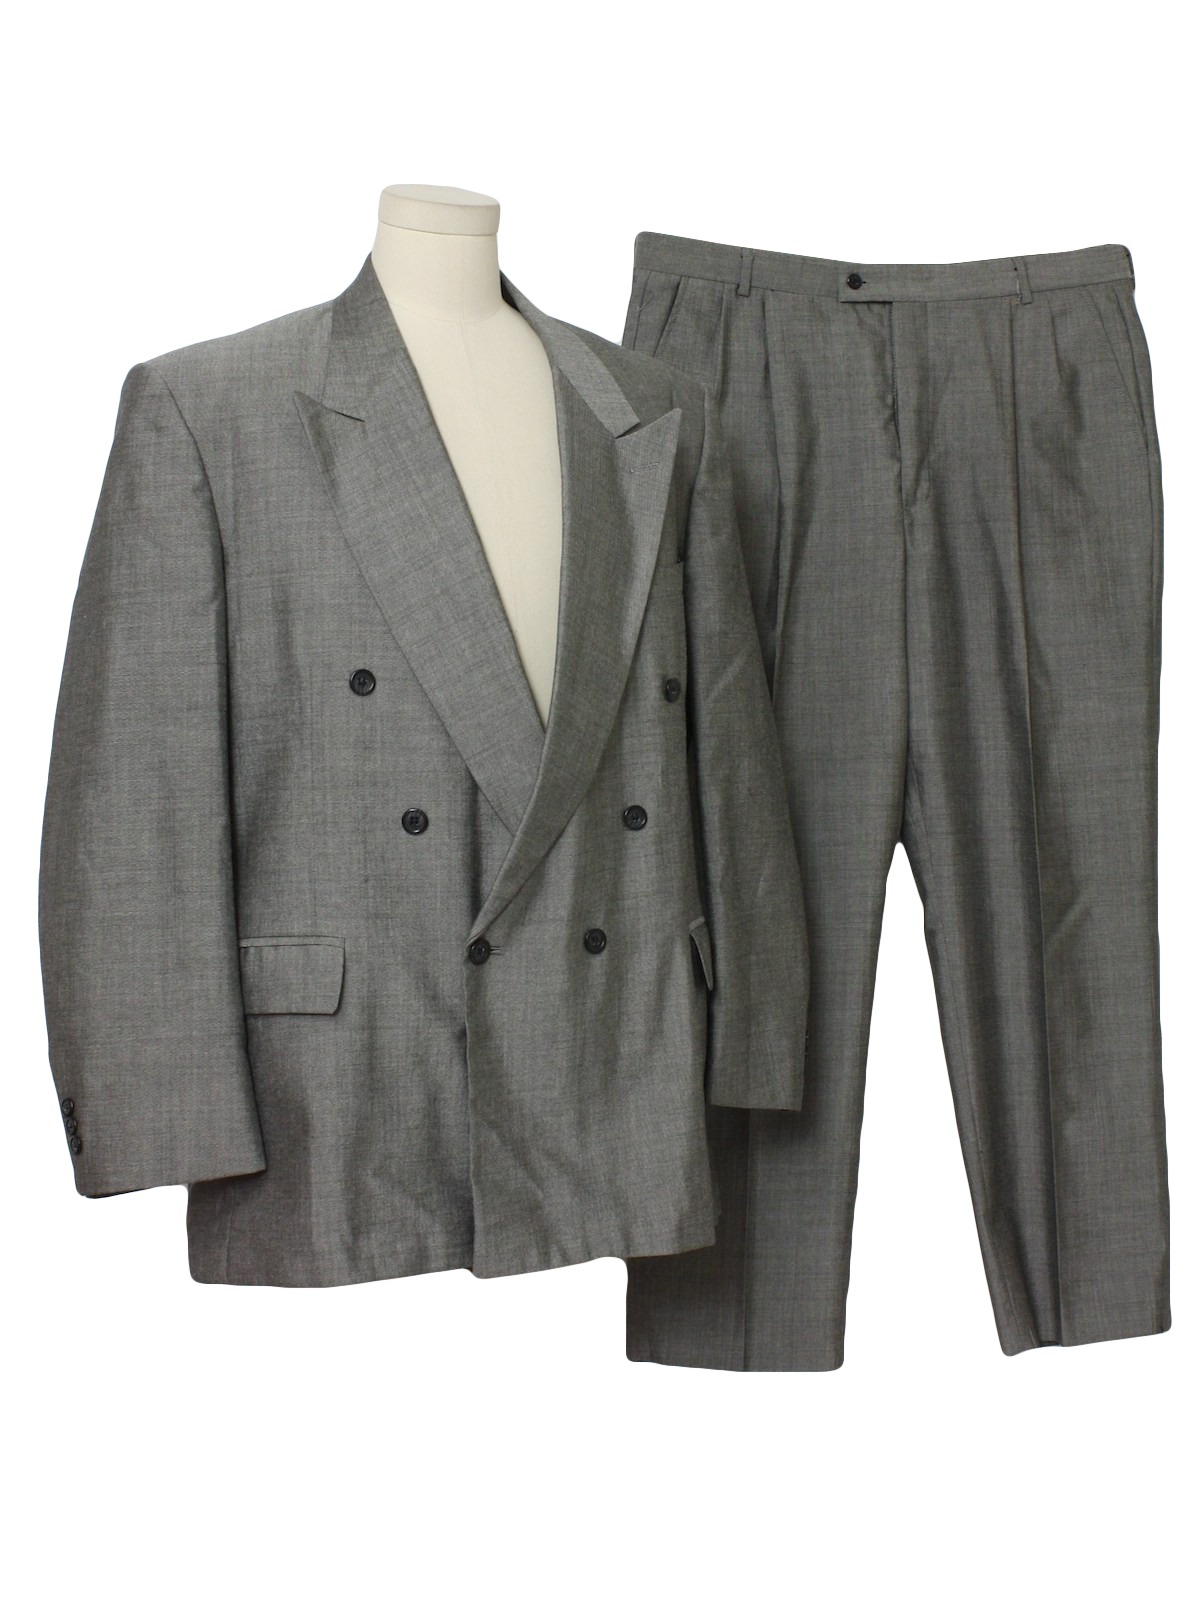 80s Retro Suit: 80s -Raffinati- Mens two piece totally 80s suit with ...